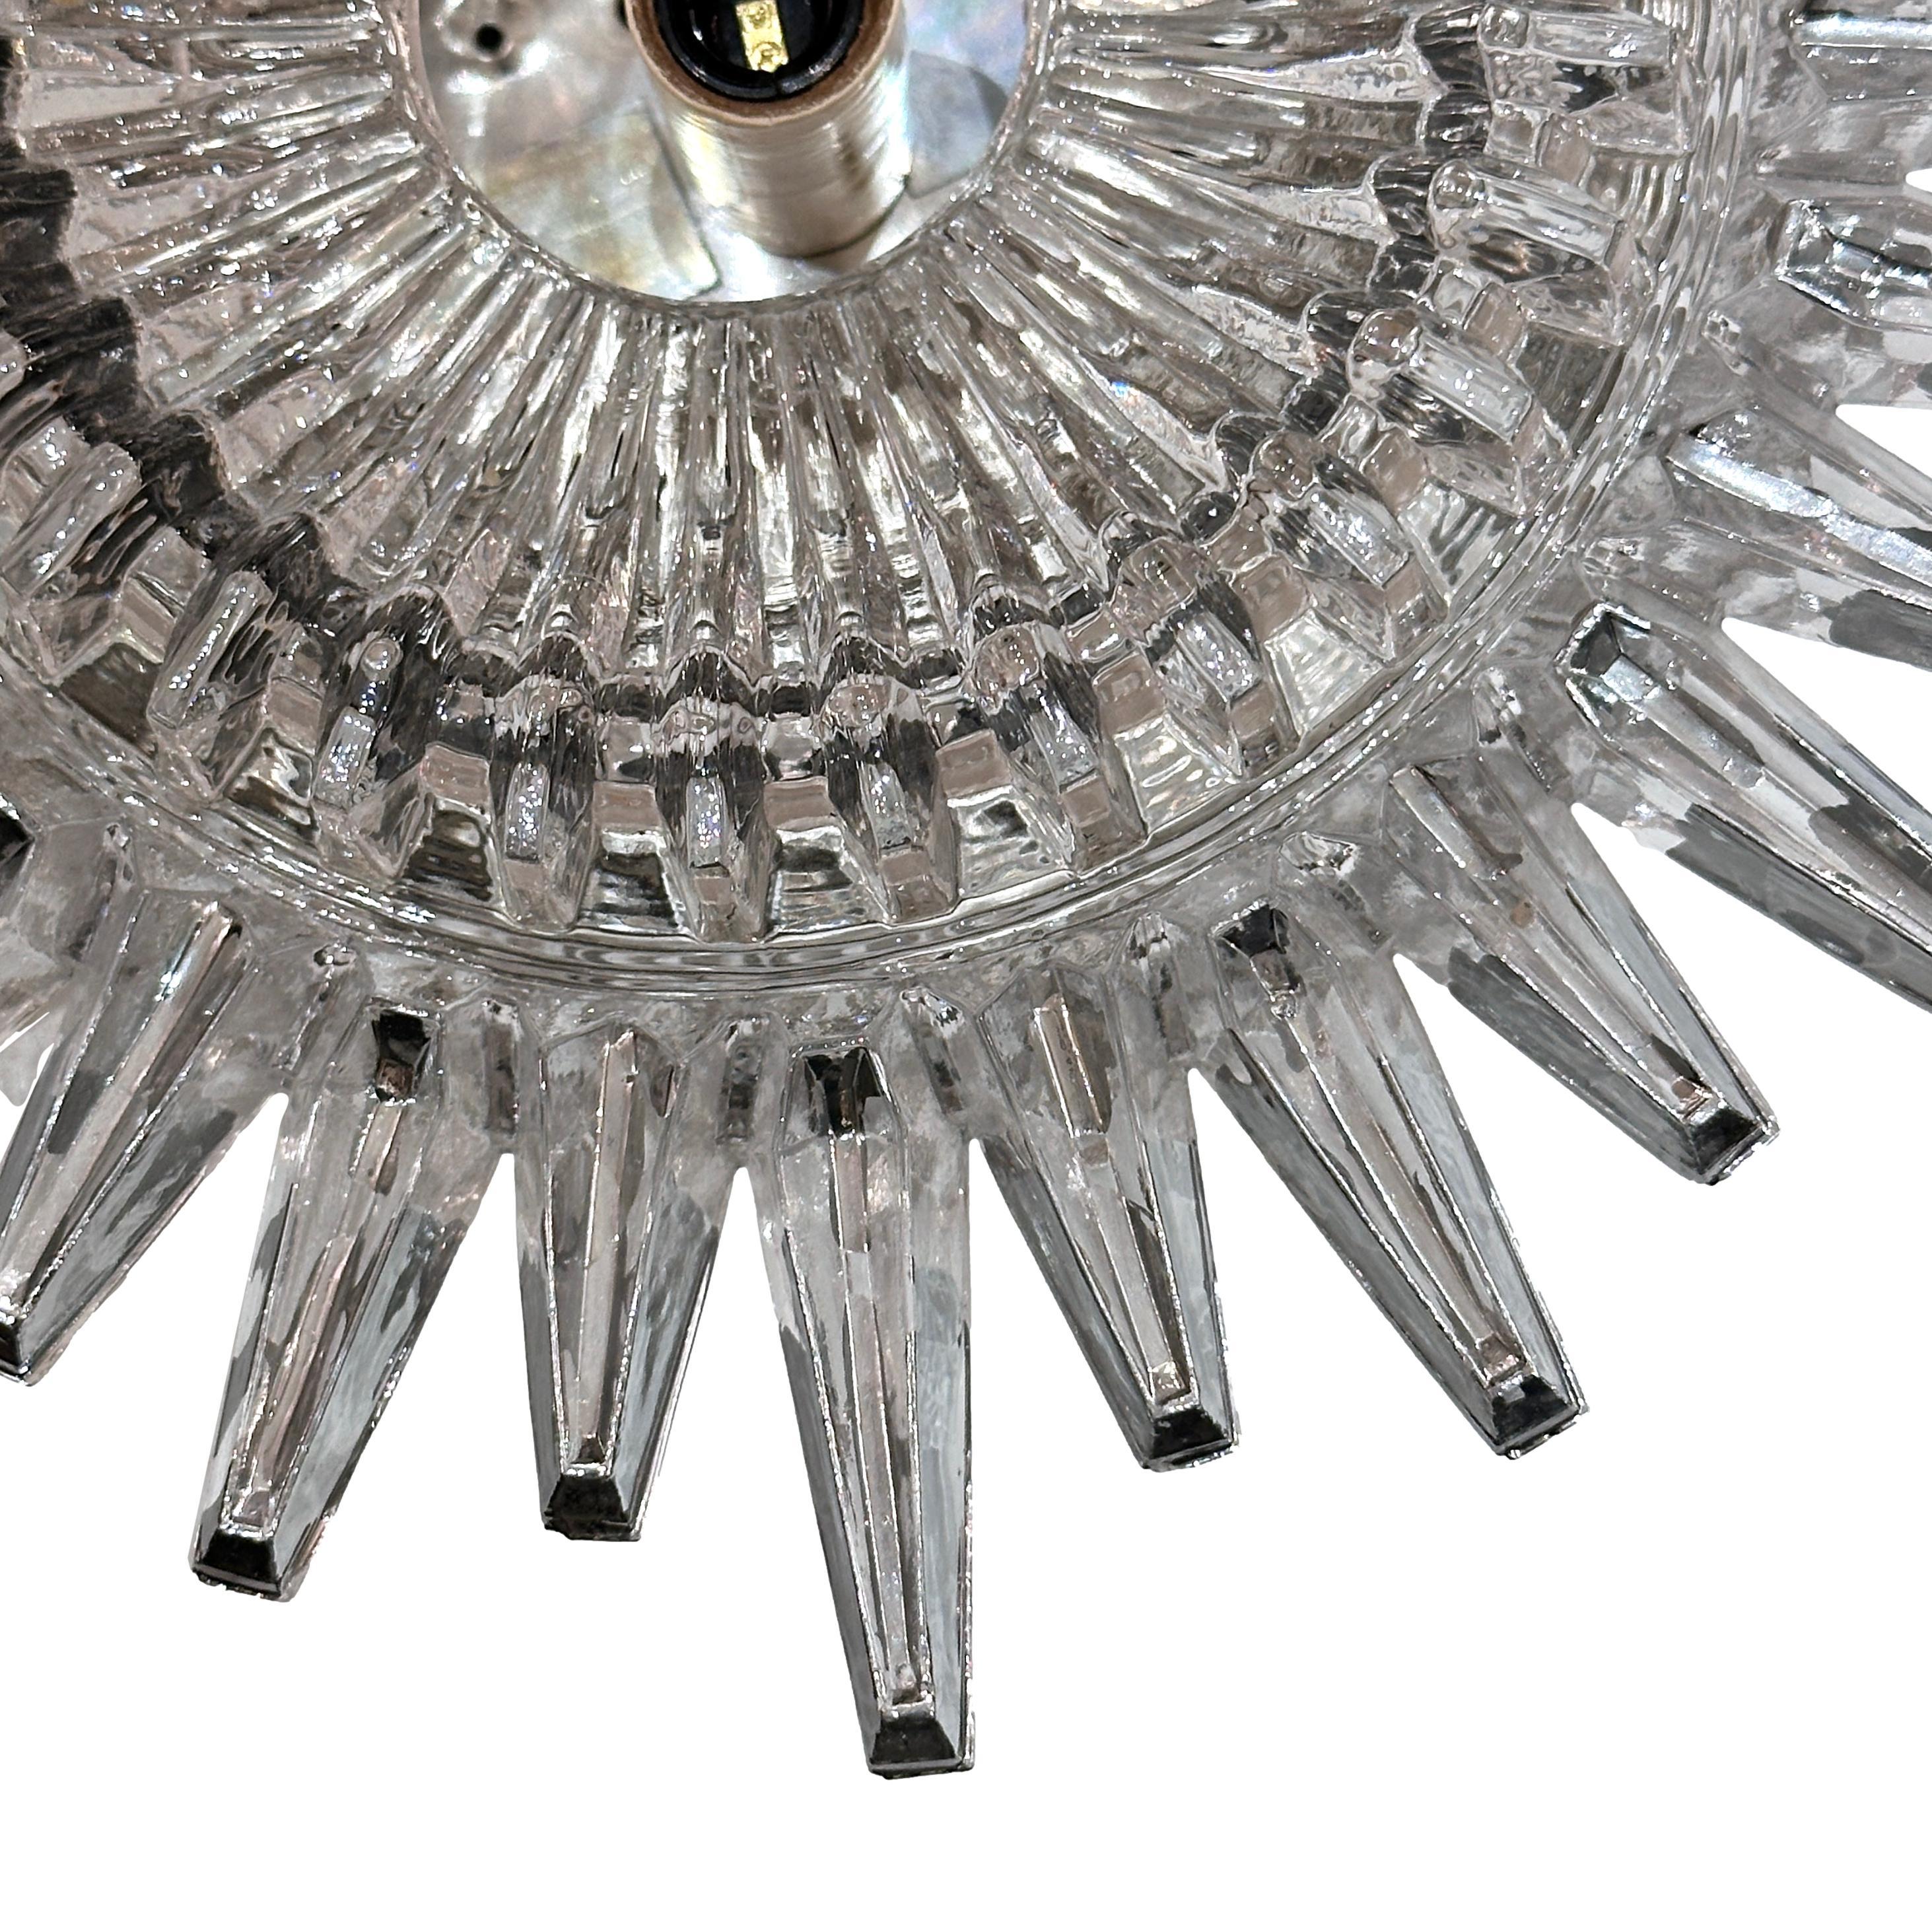 Pair of circa 1960's Swedish molded glass light fixtures with mirrored details. Sold individually.

Measurements:
Drop: 5